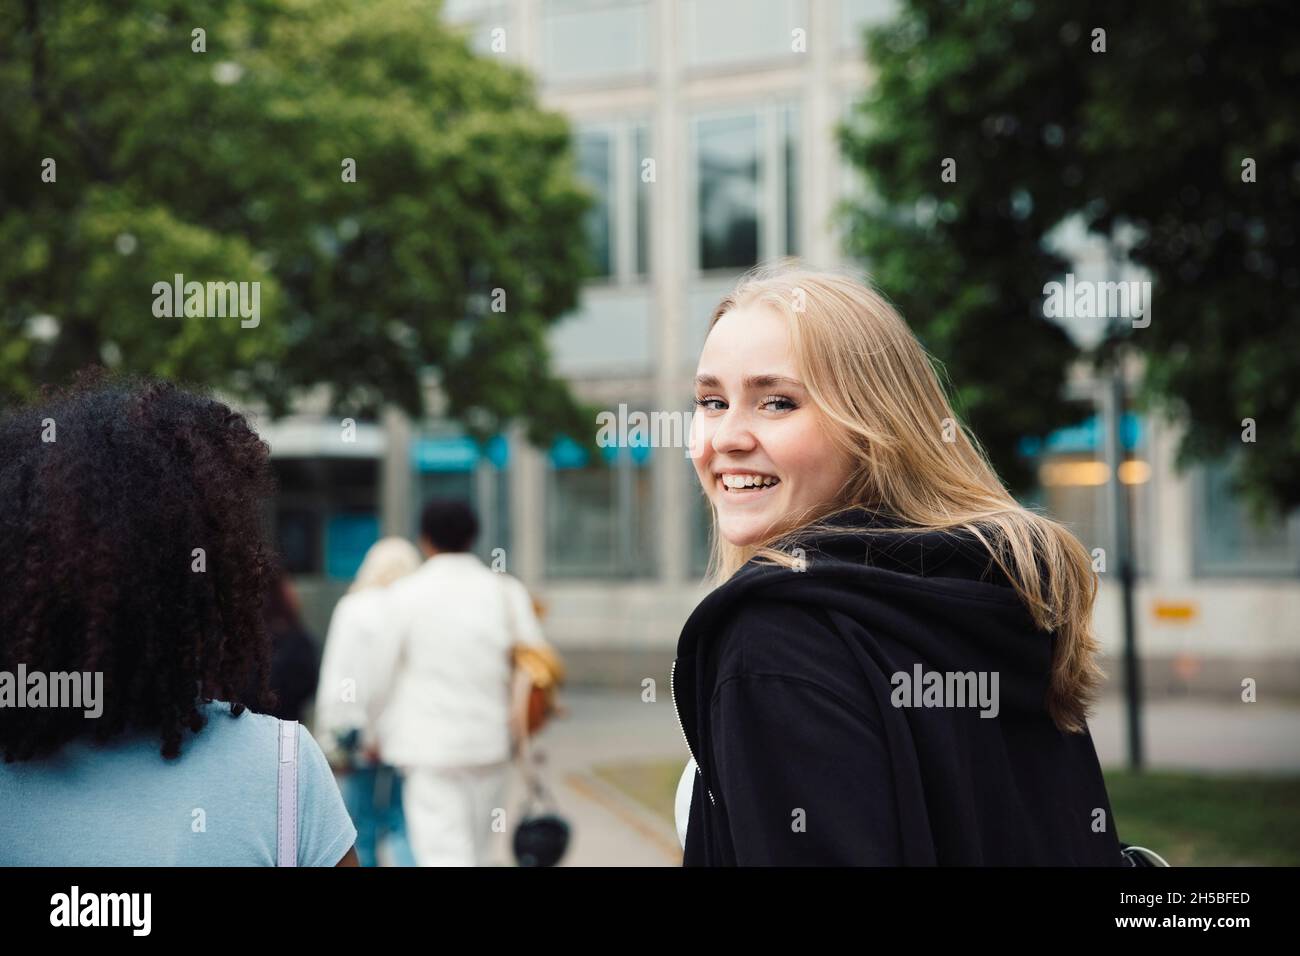 Smiling teenage girl looking over shoulder while walking with friends Stock Photo